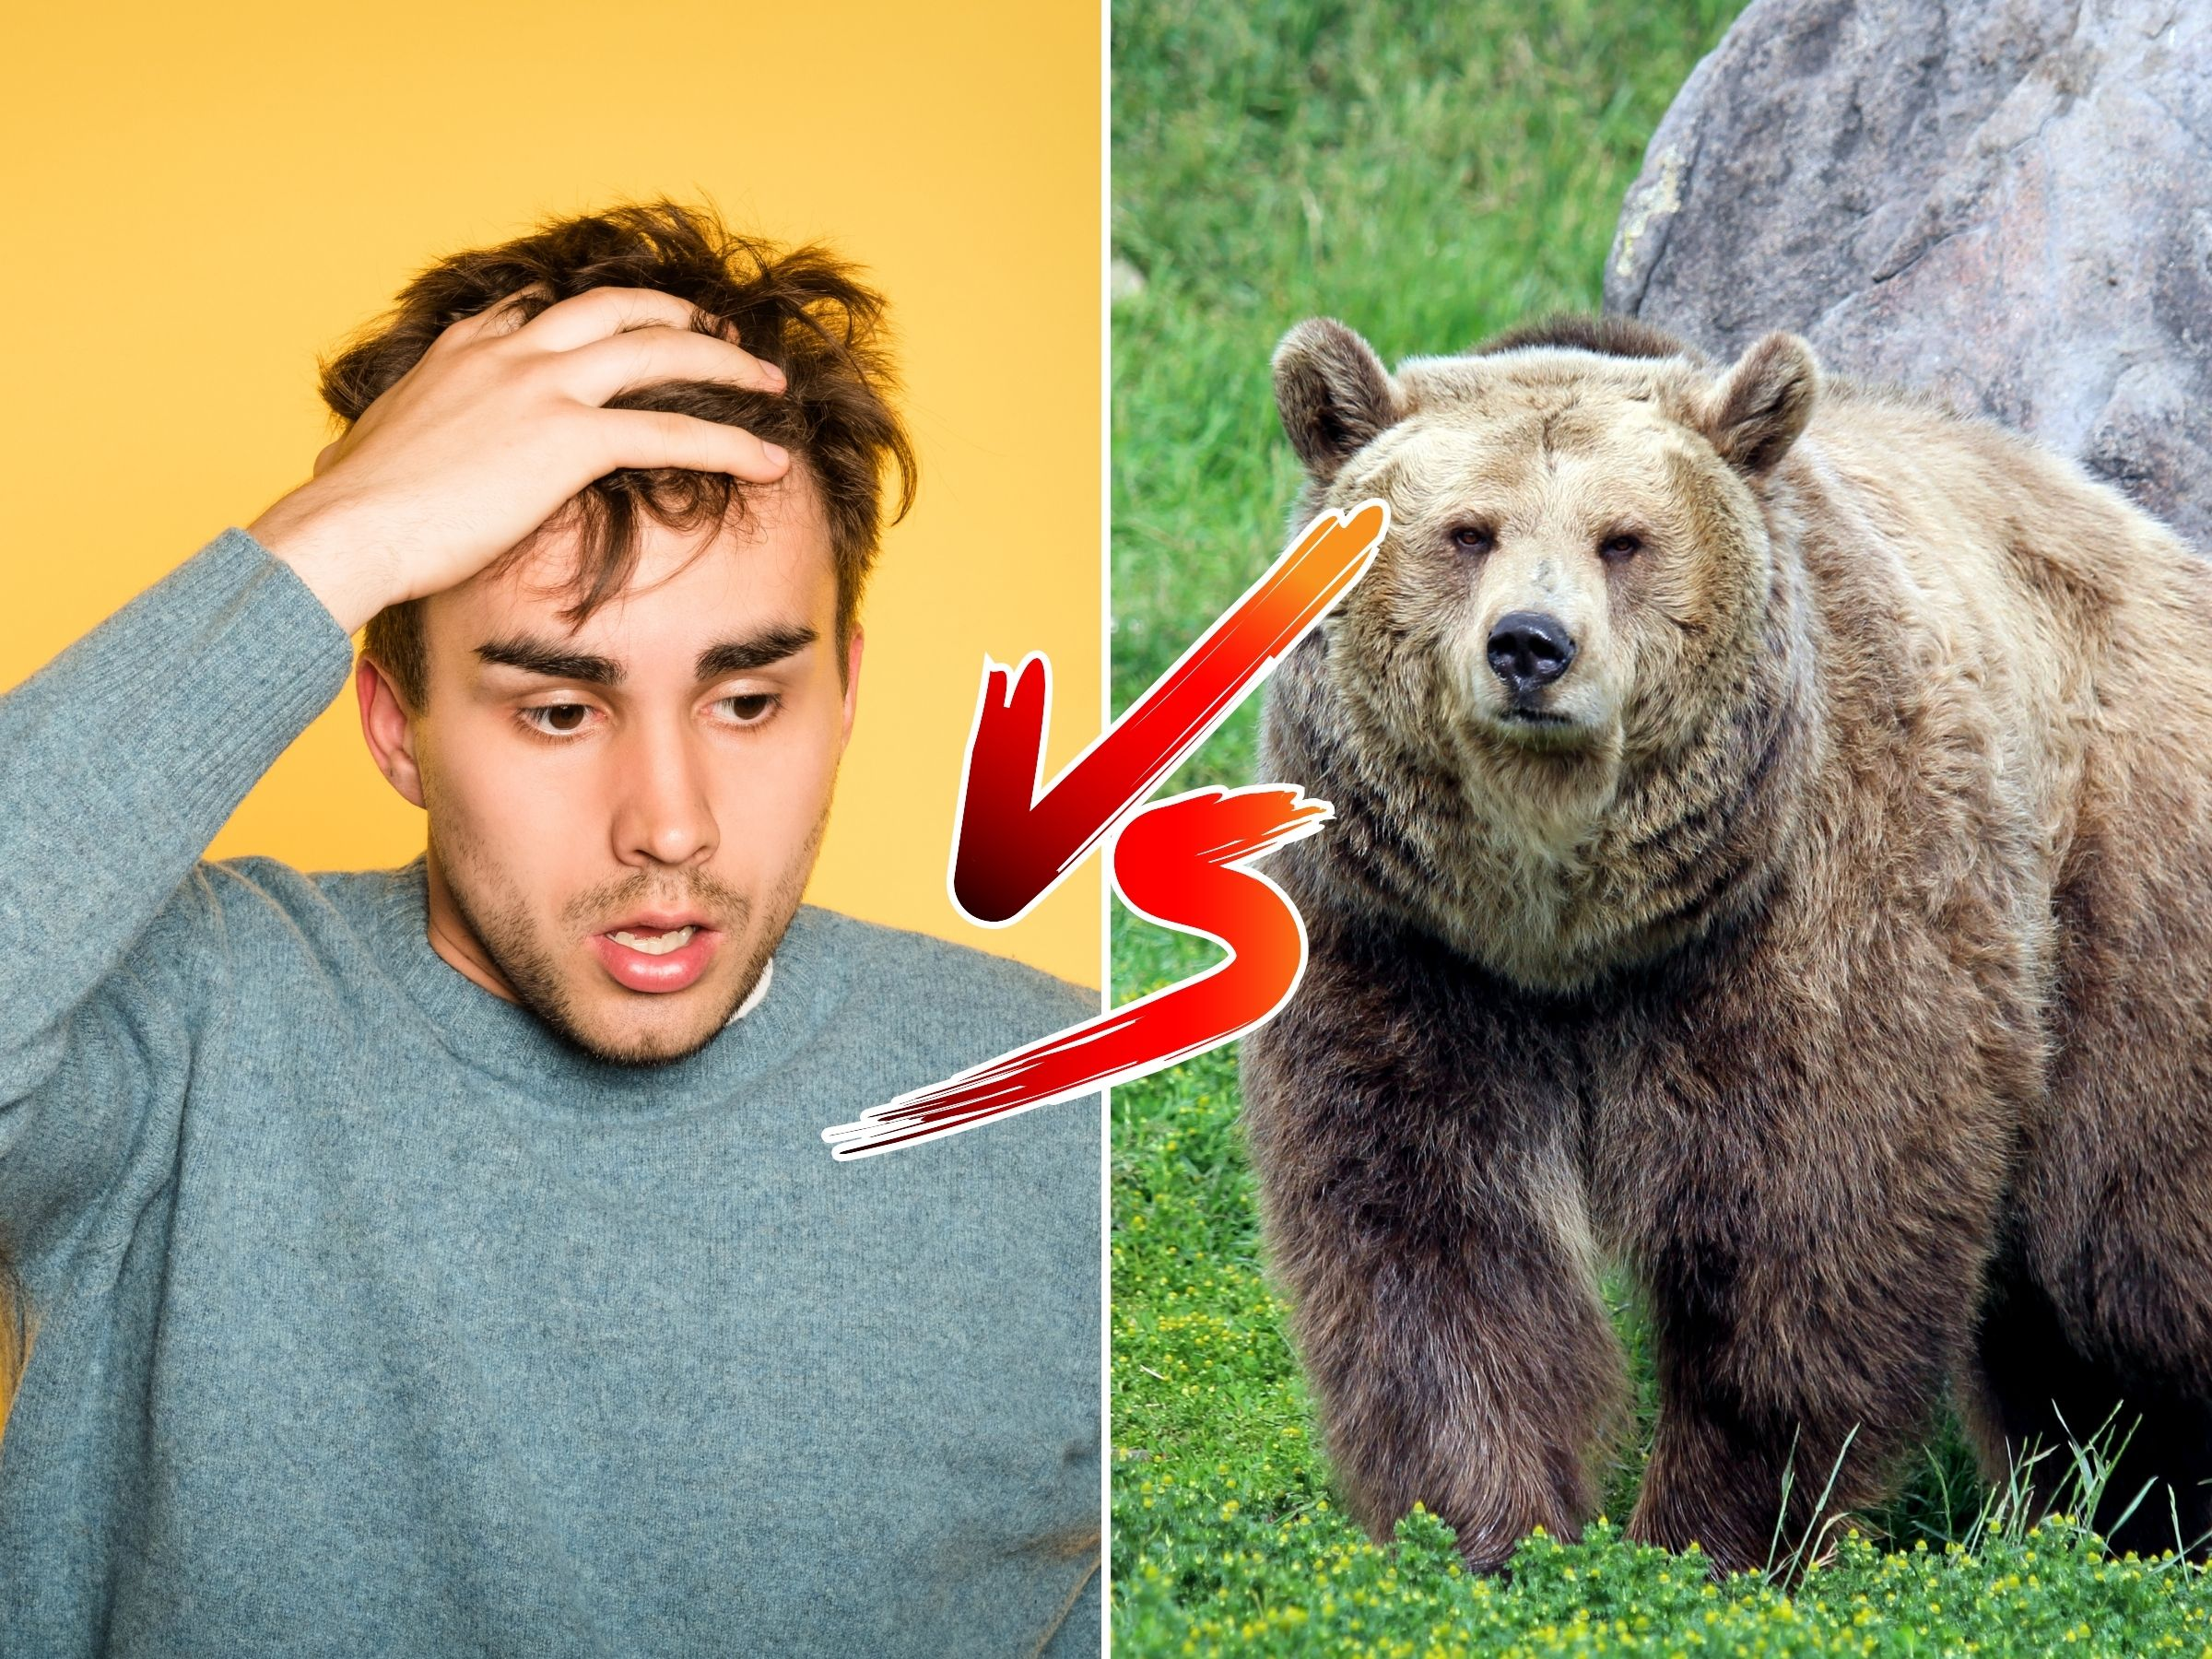 Would you rather be alone in the woods and come across a bear or a man?